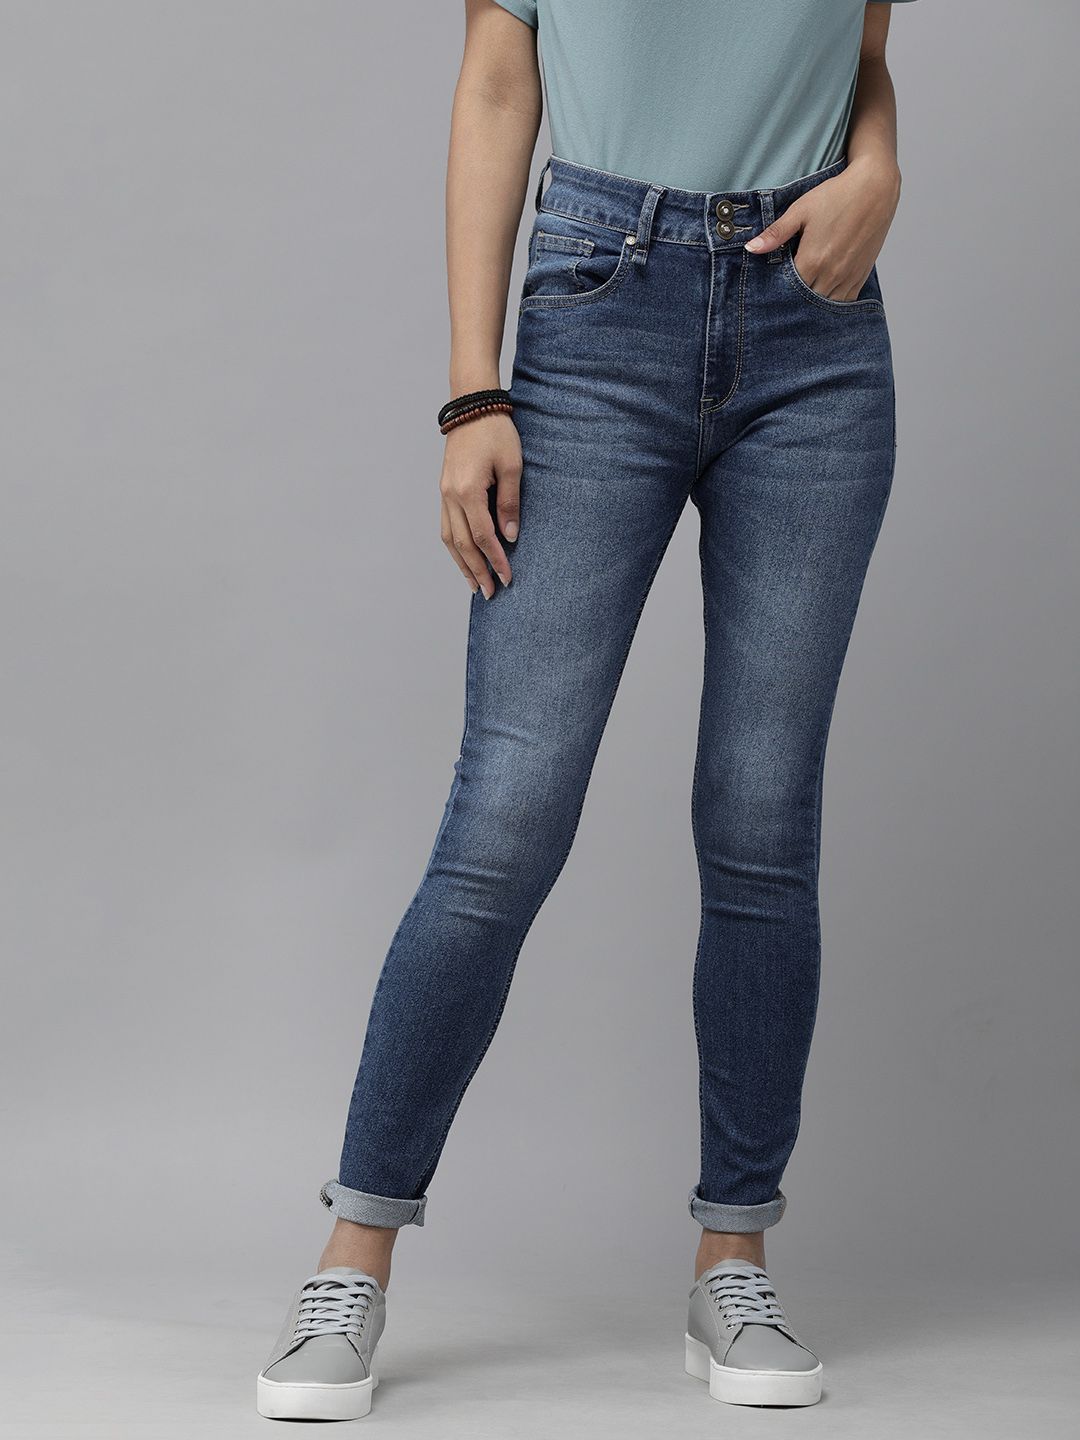 The Roadster Lifestyle Co Women Blue Skinny Fit High-Rise Light Fade Stretchable Jeans Price in India